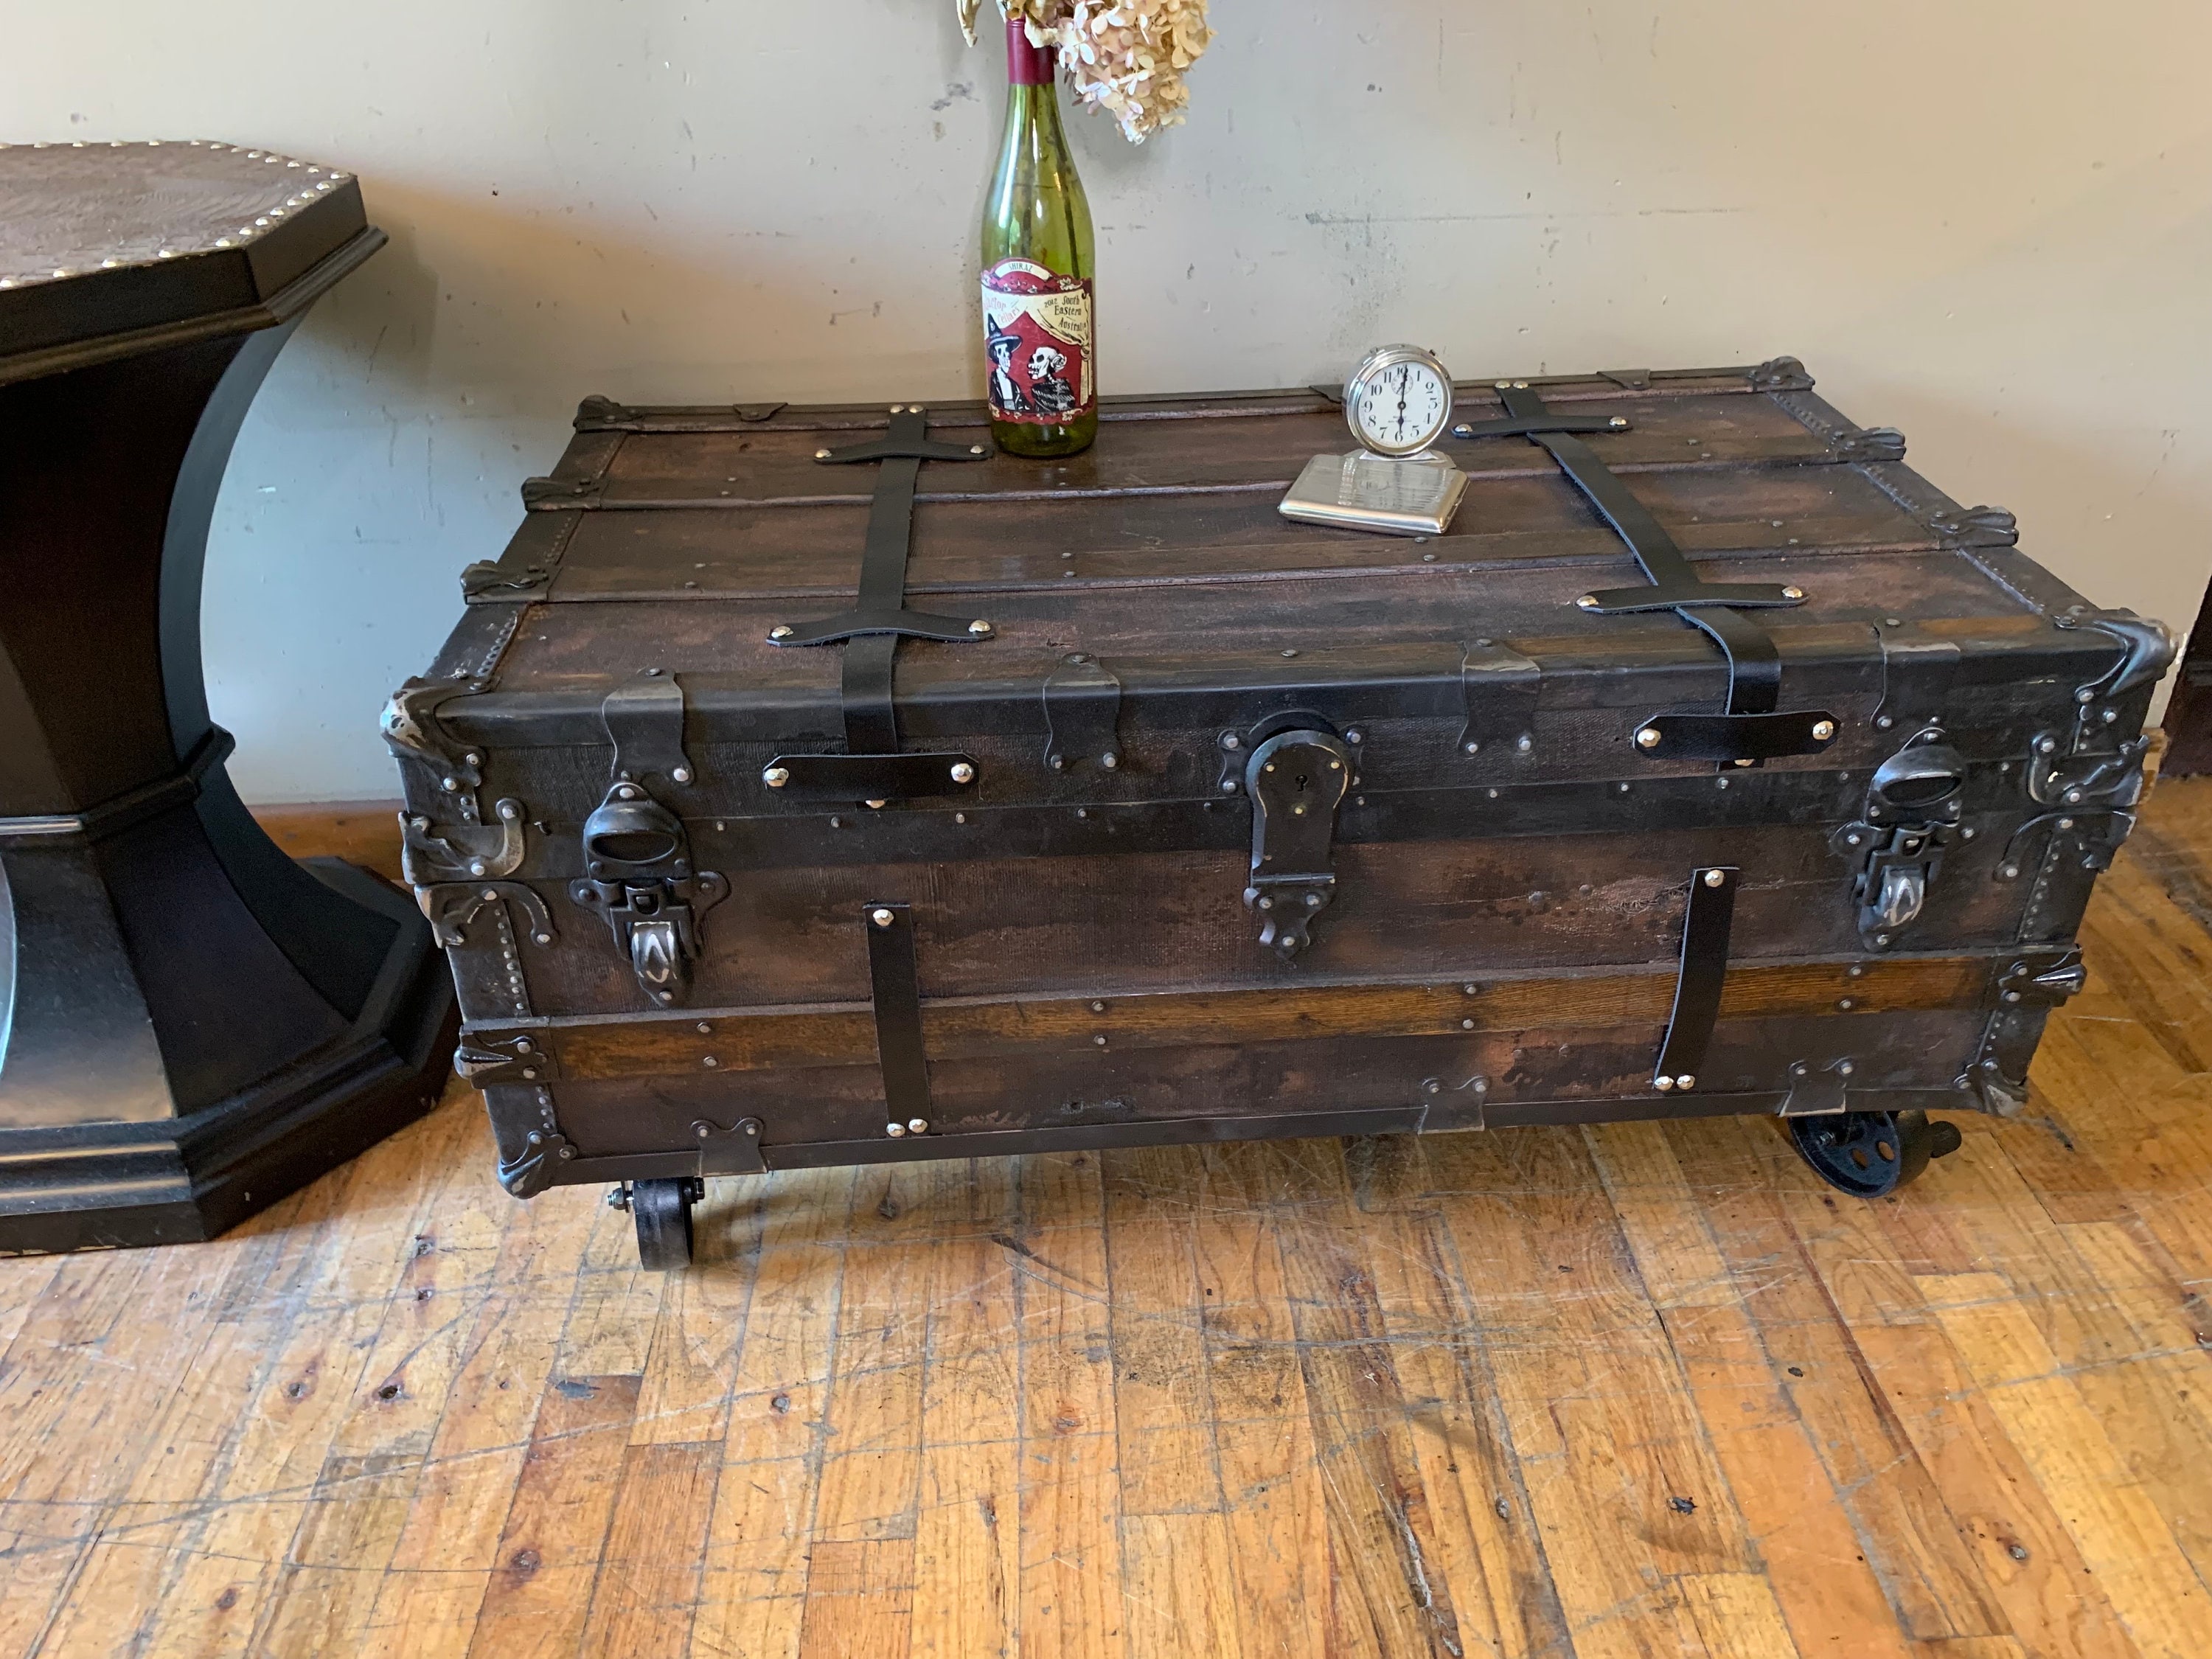 Antique steamer trunk I used for a coffee table